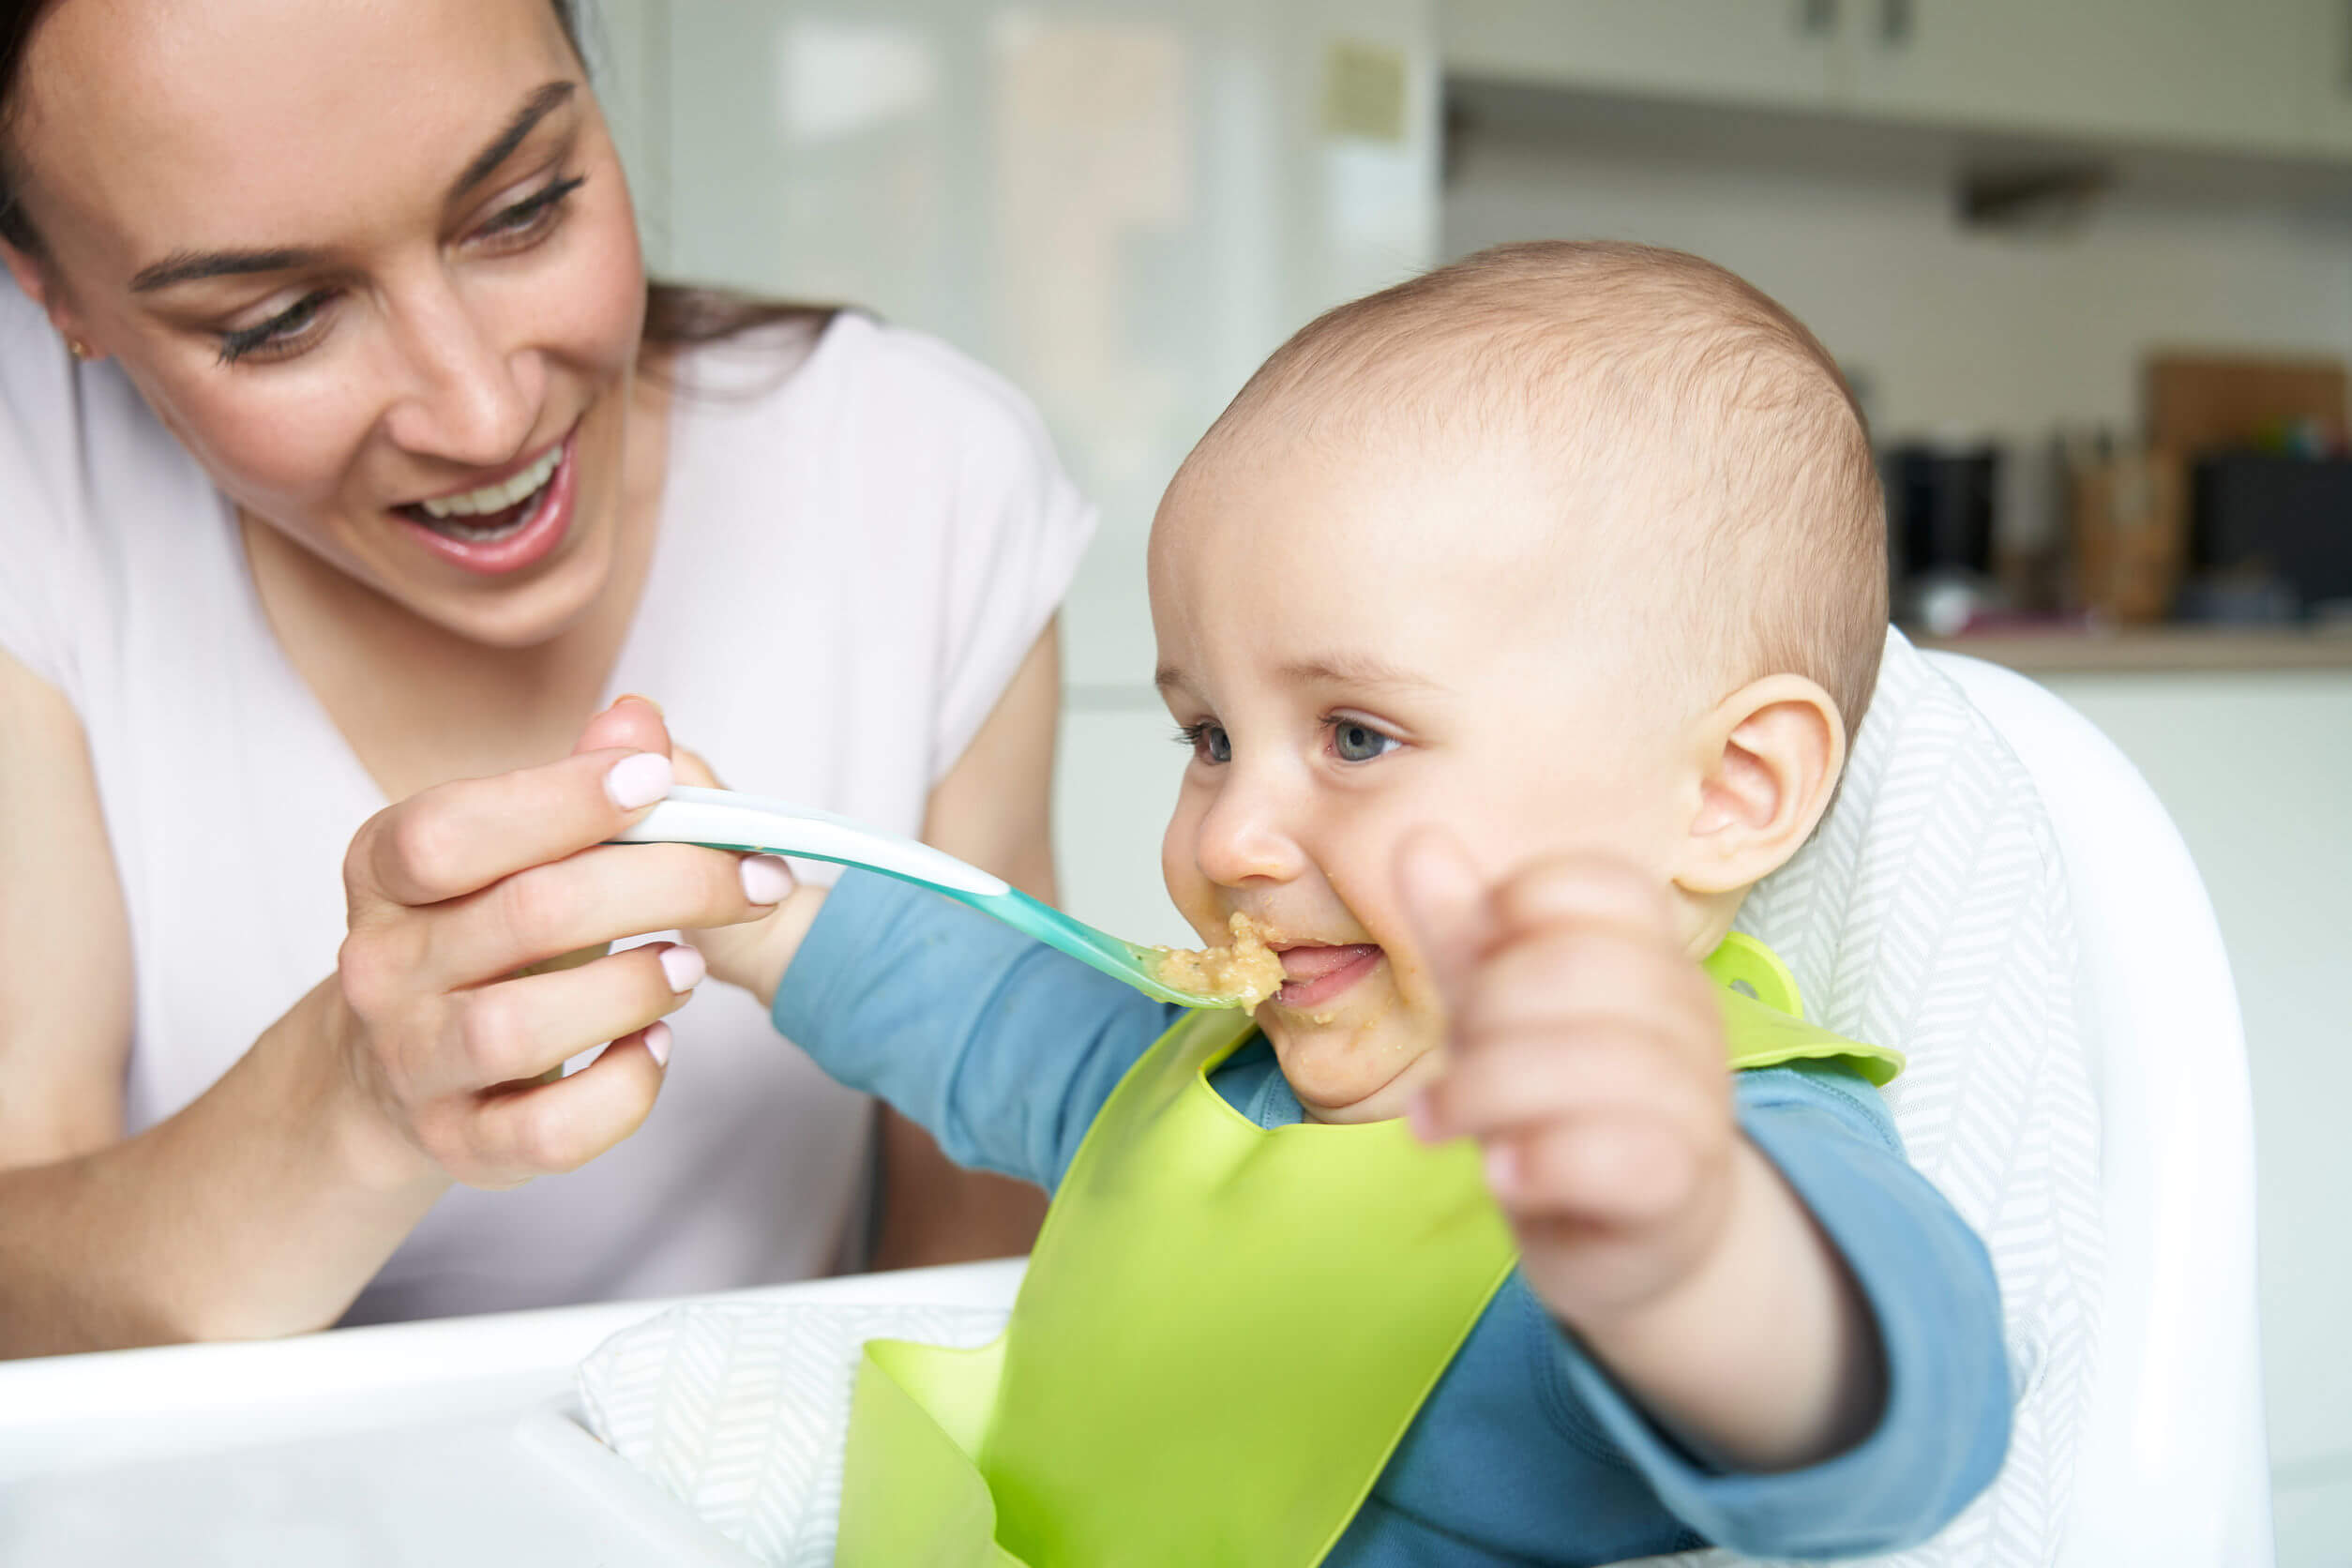 A mother spoon feeding her baby with mashed food.